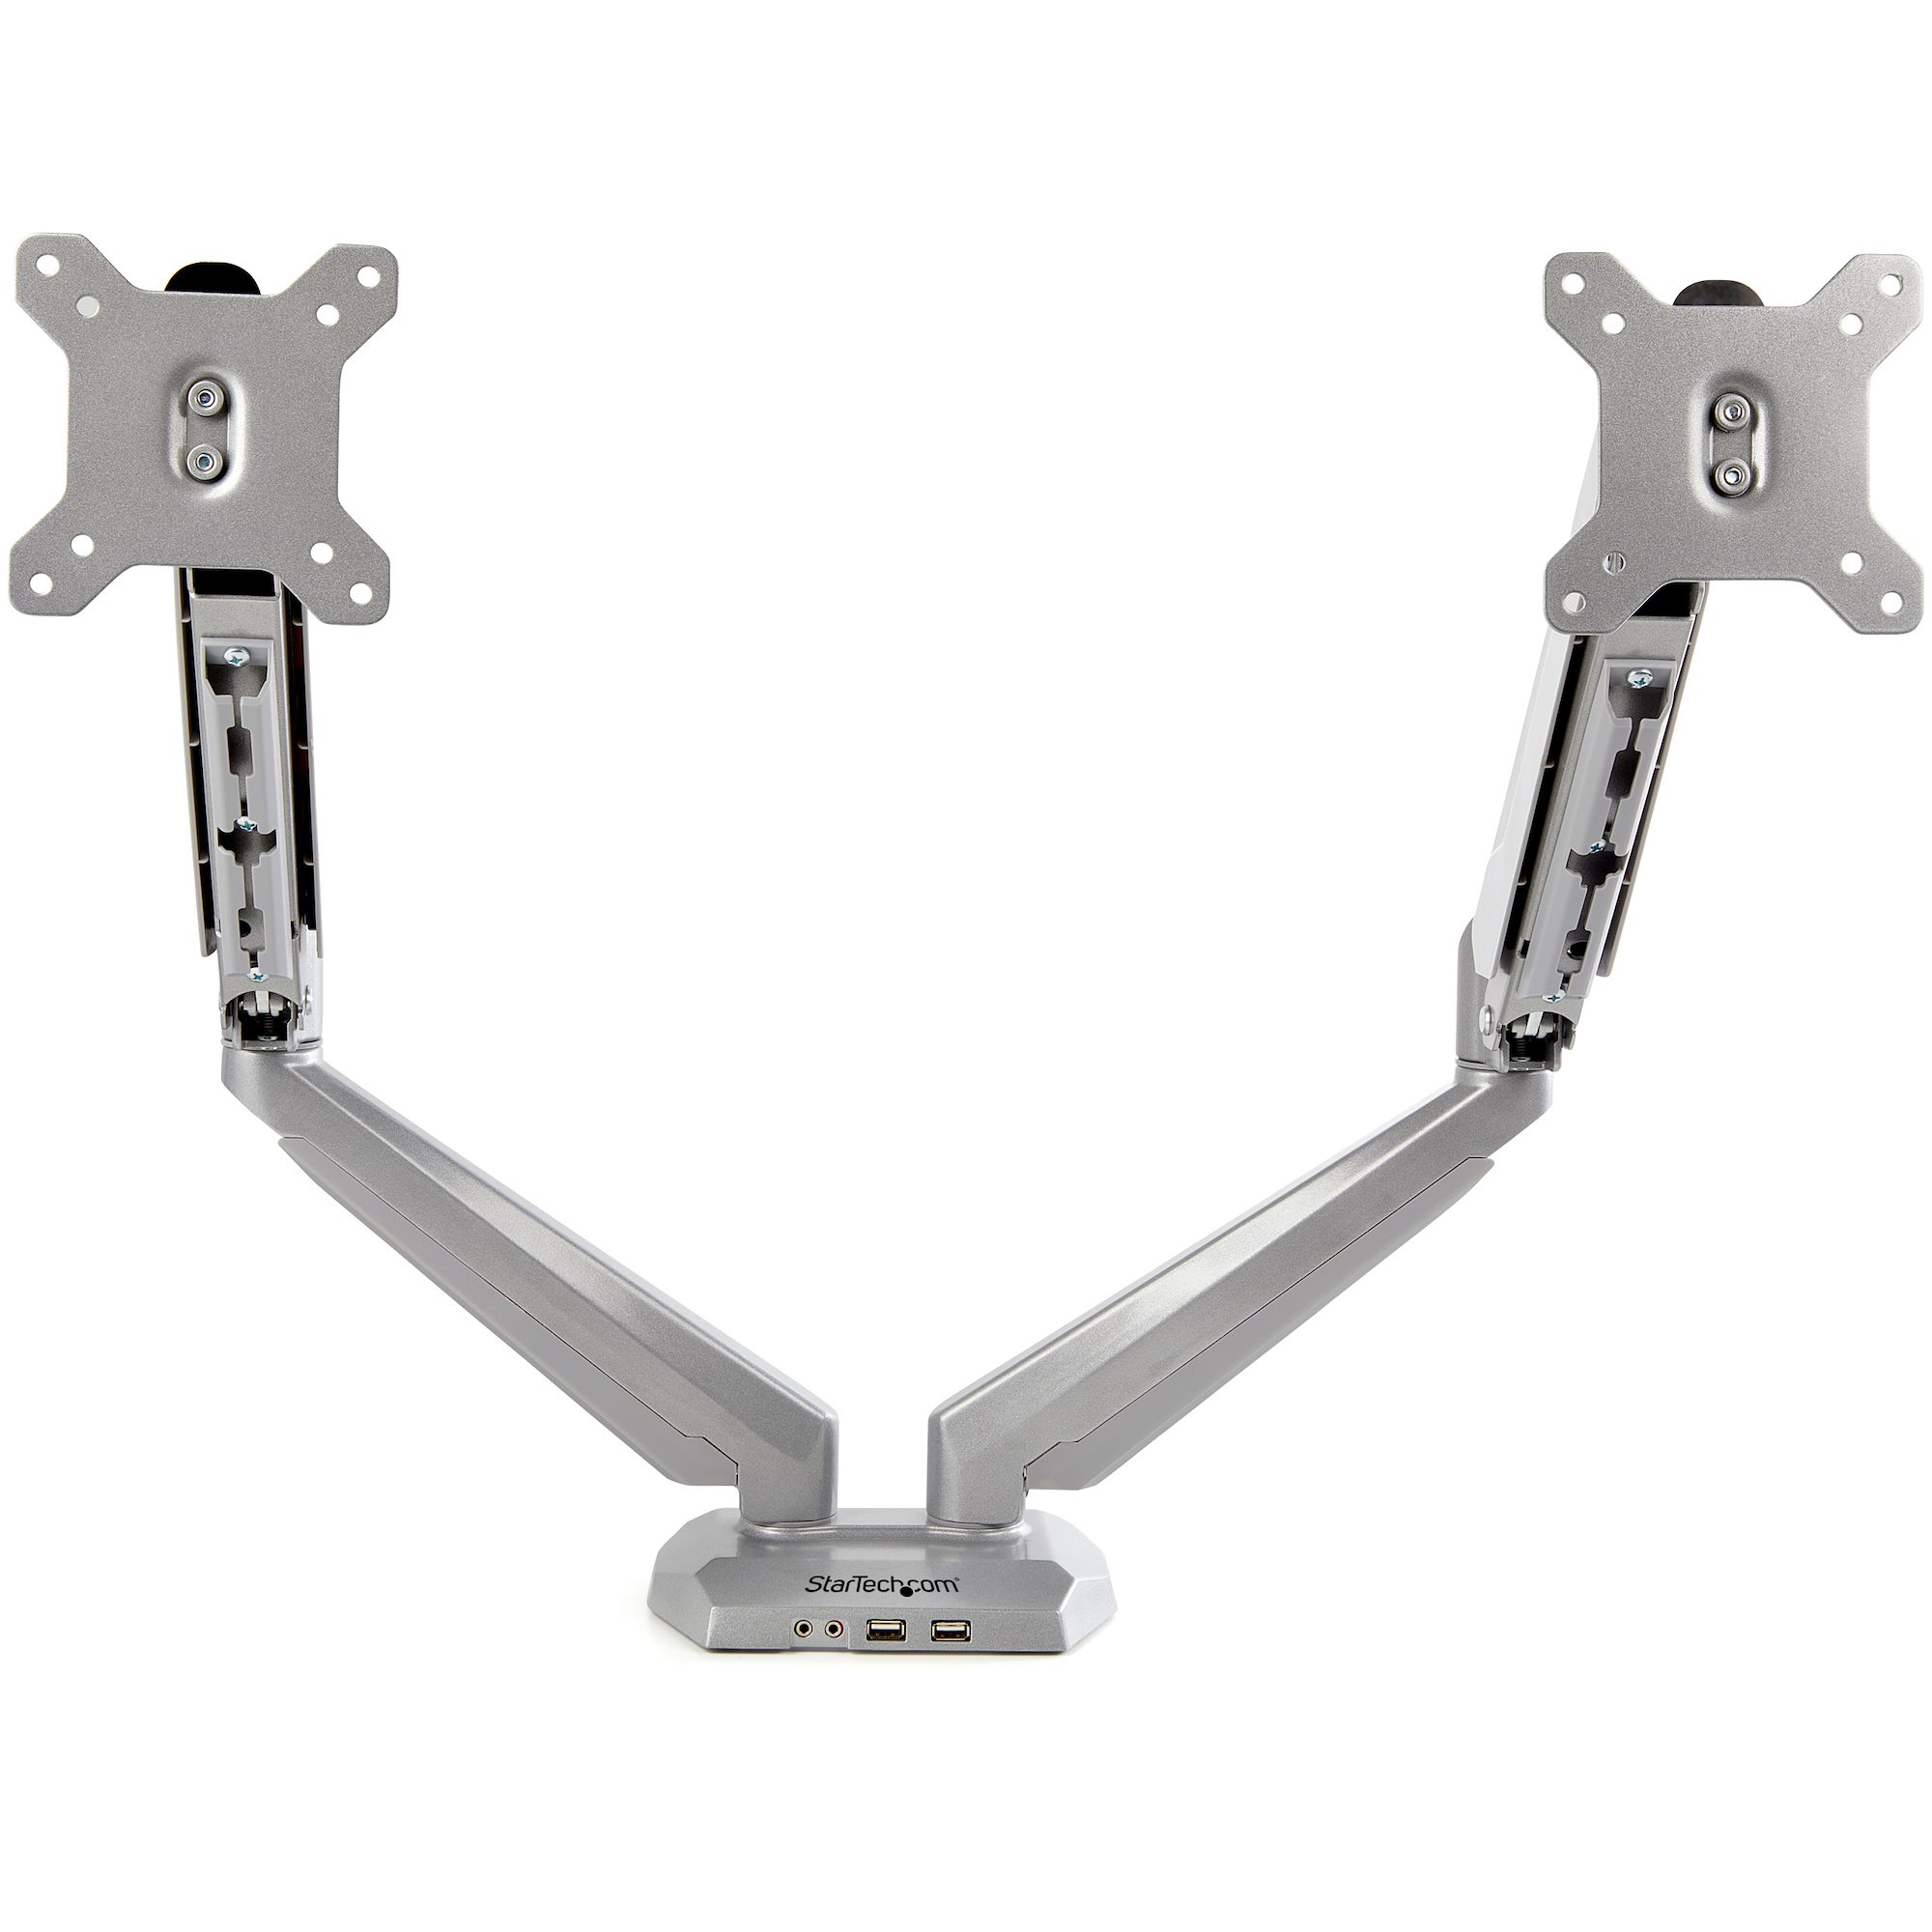 StarTech.com Desk Mount Dual Monitor Arm with USB & Audio - Desk Clamp VESA Mount for up to 30 inch Displays - 2x USB, 2x 3.5mm audio - Ergonomic Full Motion Dual Monitor Arm - Silver